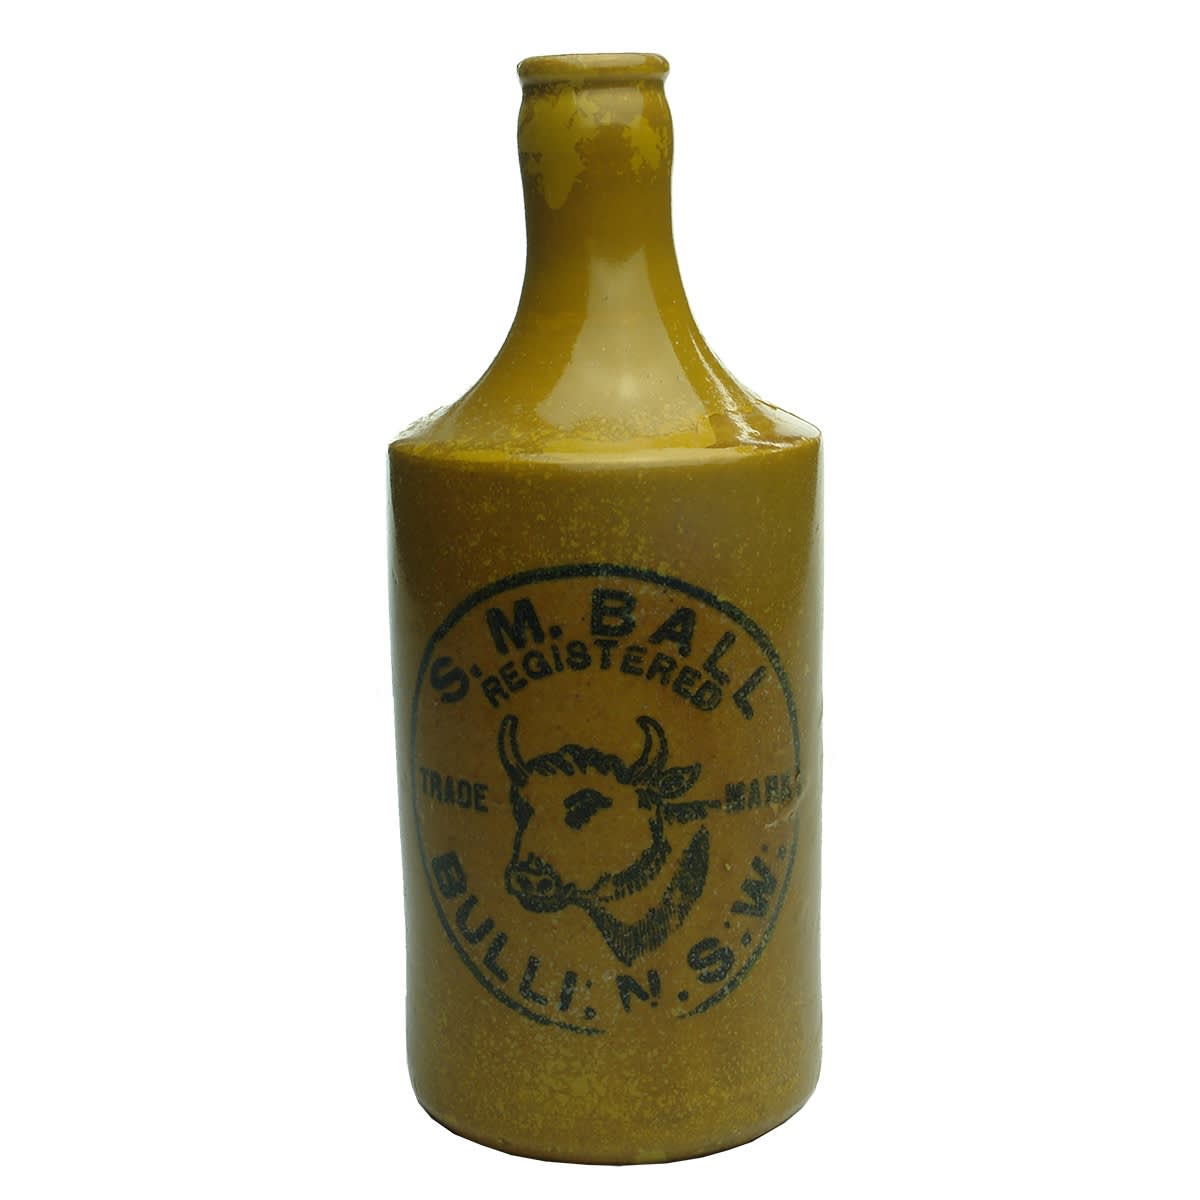 Ginger Beer. S. M. Ball, Bulli. Crown Seal. Dump. All Tan. (New South Wales)